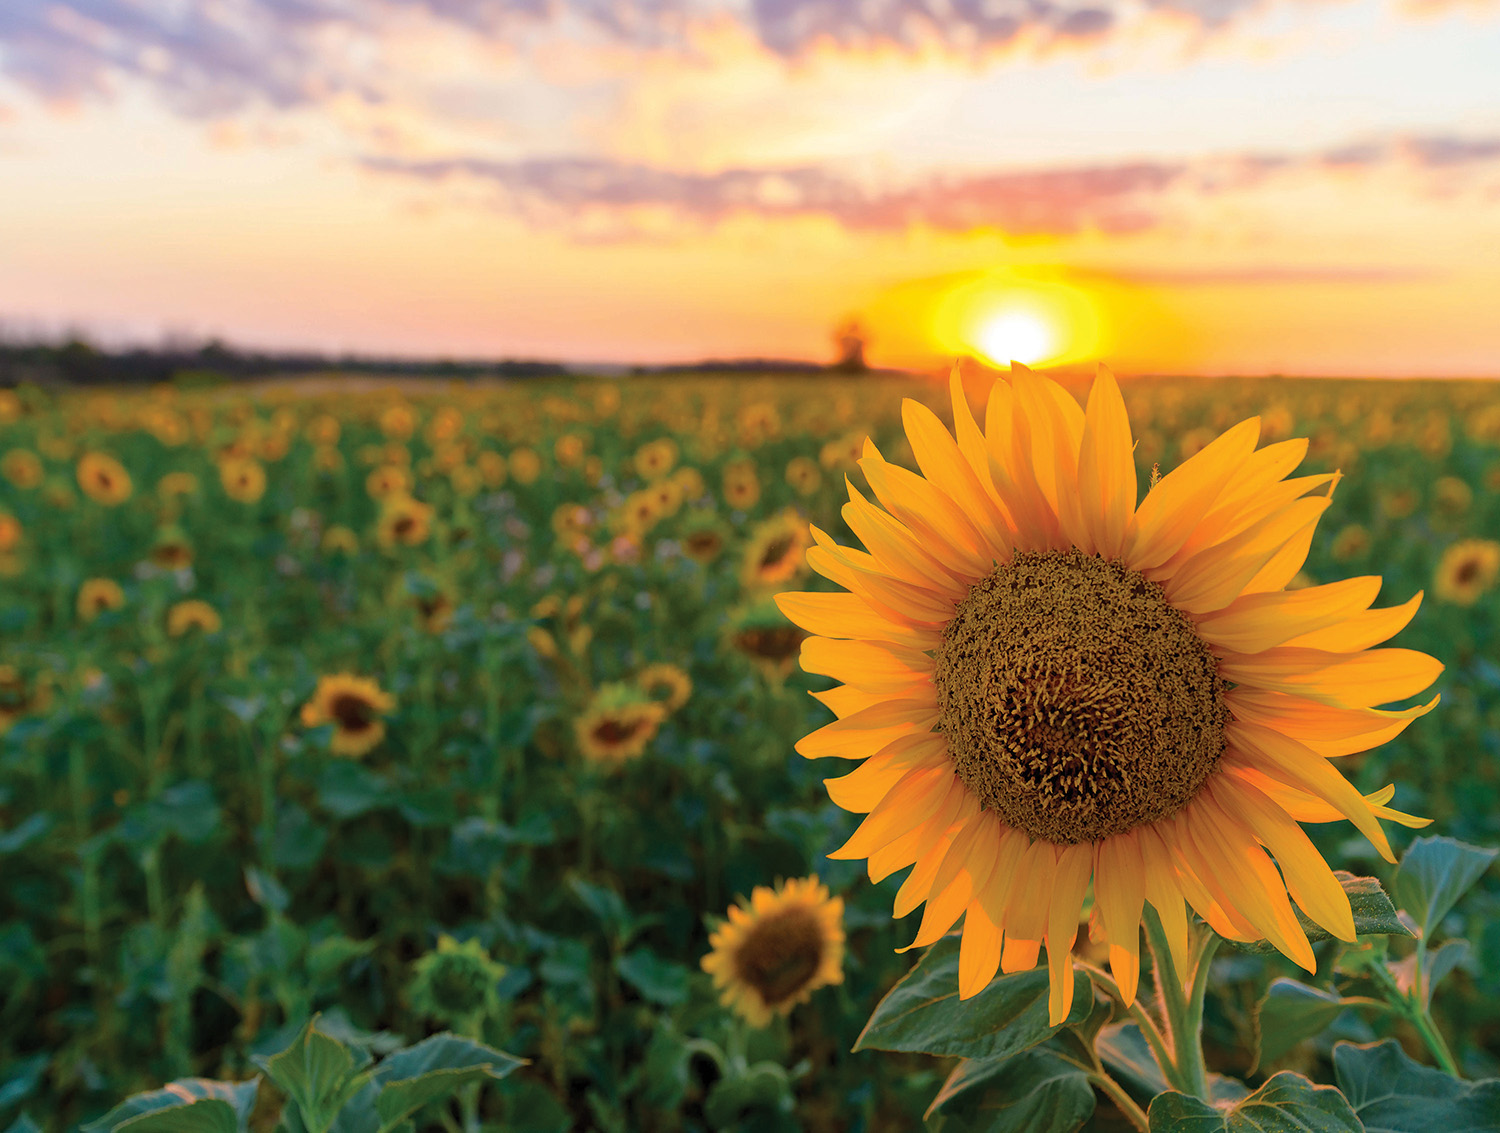 Sunflower Field at Sunset Countryside Jigsaw Puzzle